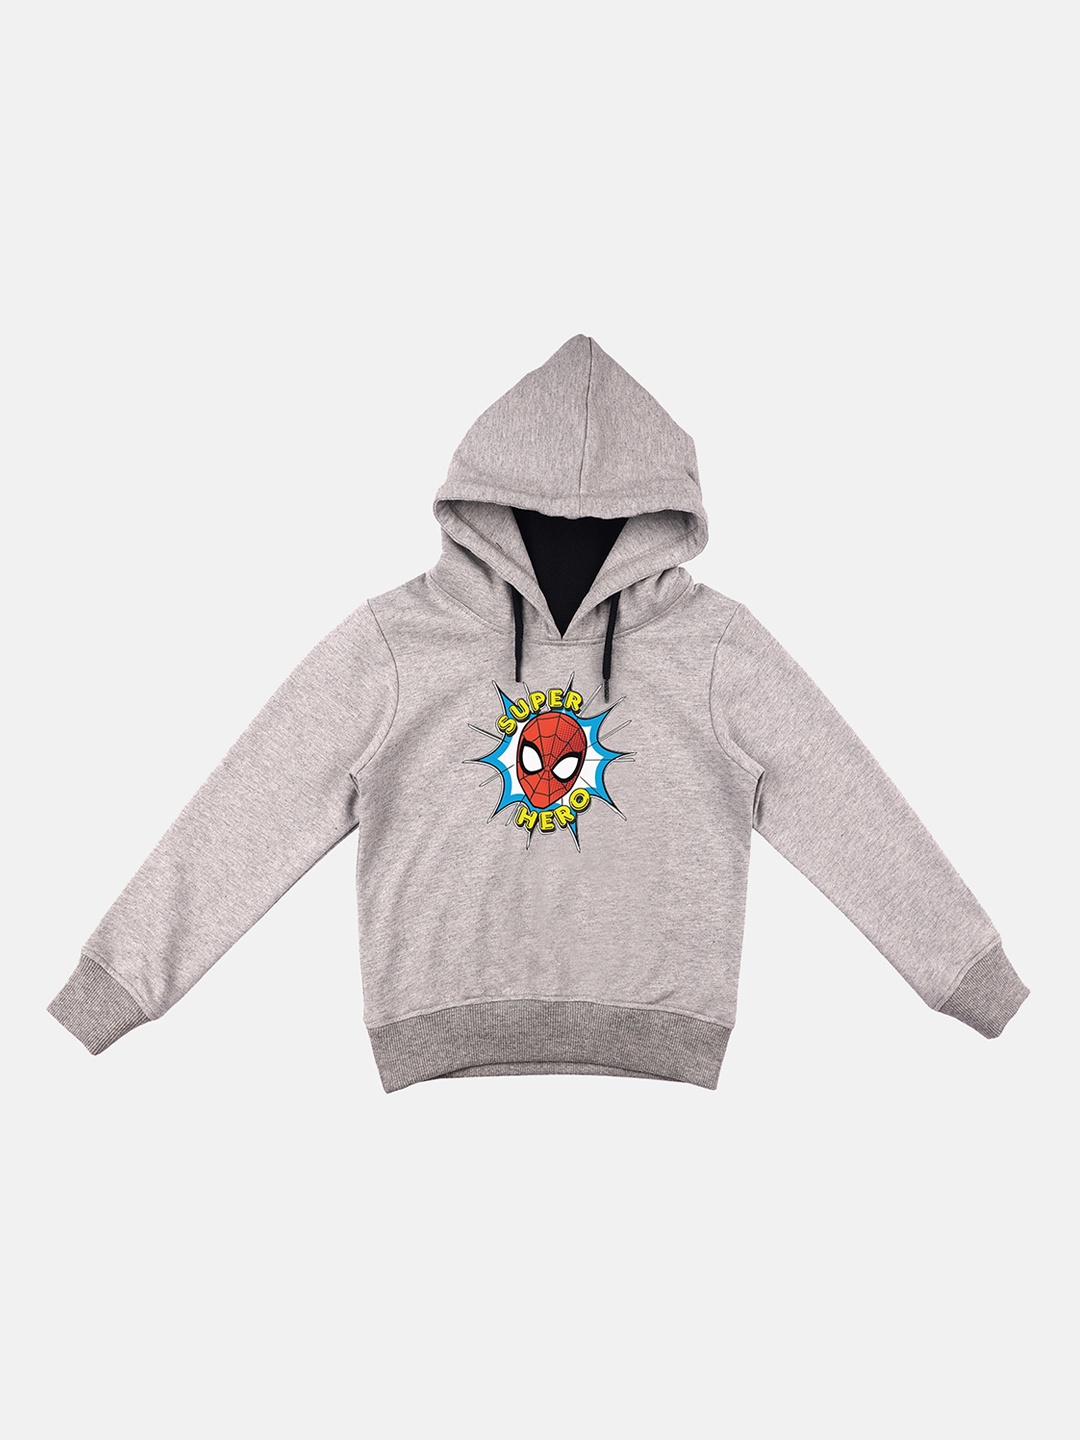 

YK Marvel Boys Grey Avengers Spiderman Print Hooded Sweatshirt With Attached Face Covering